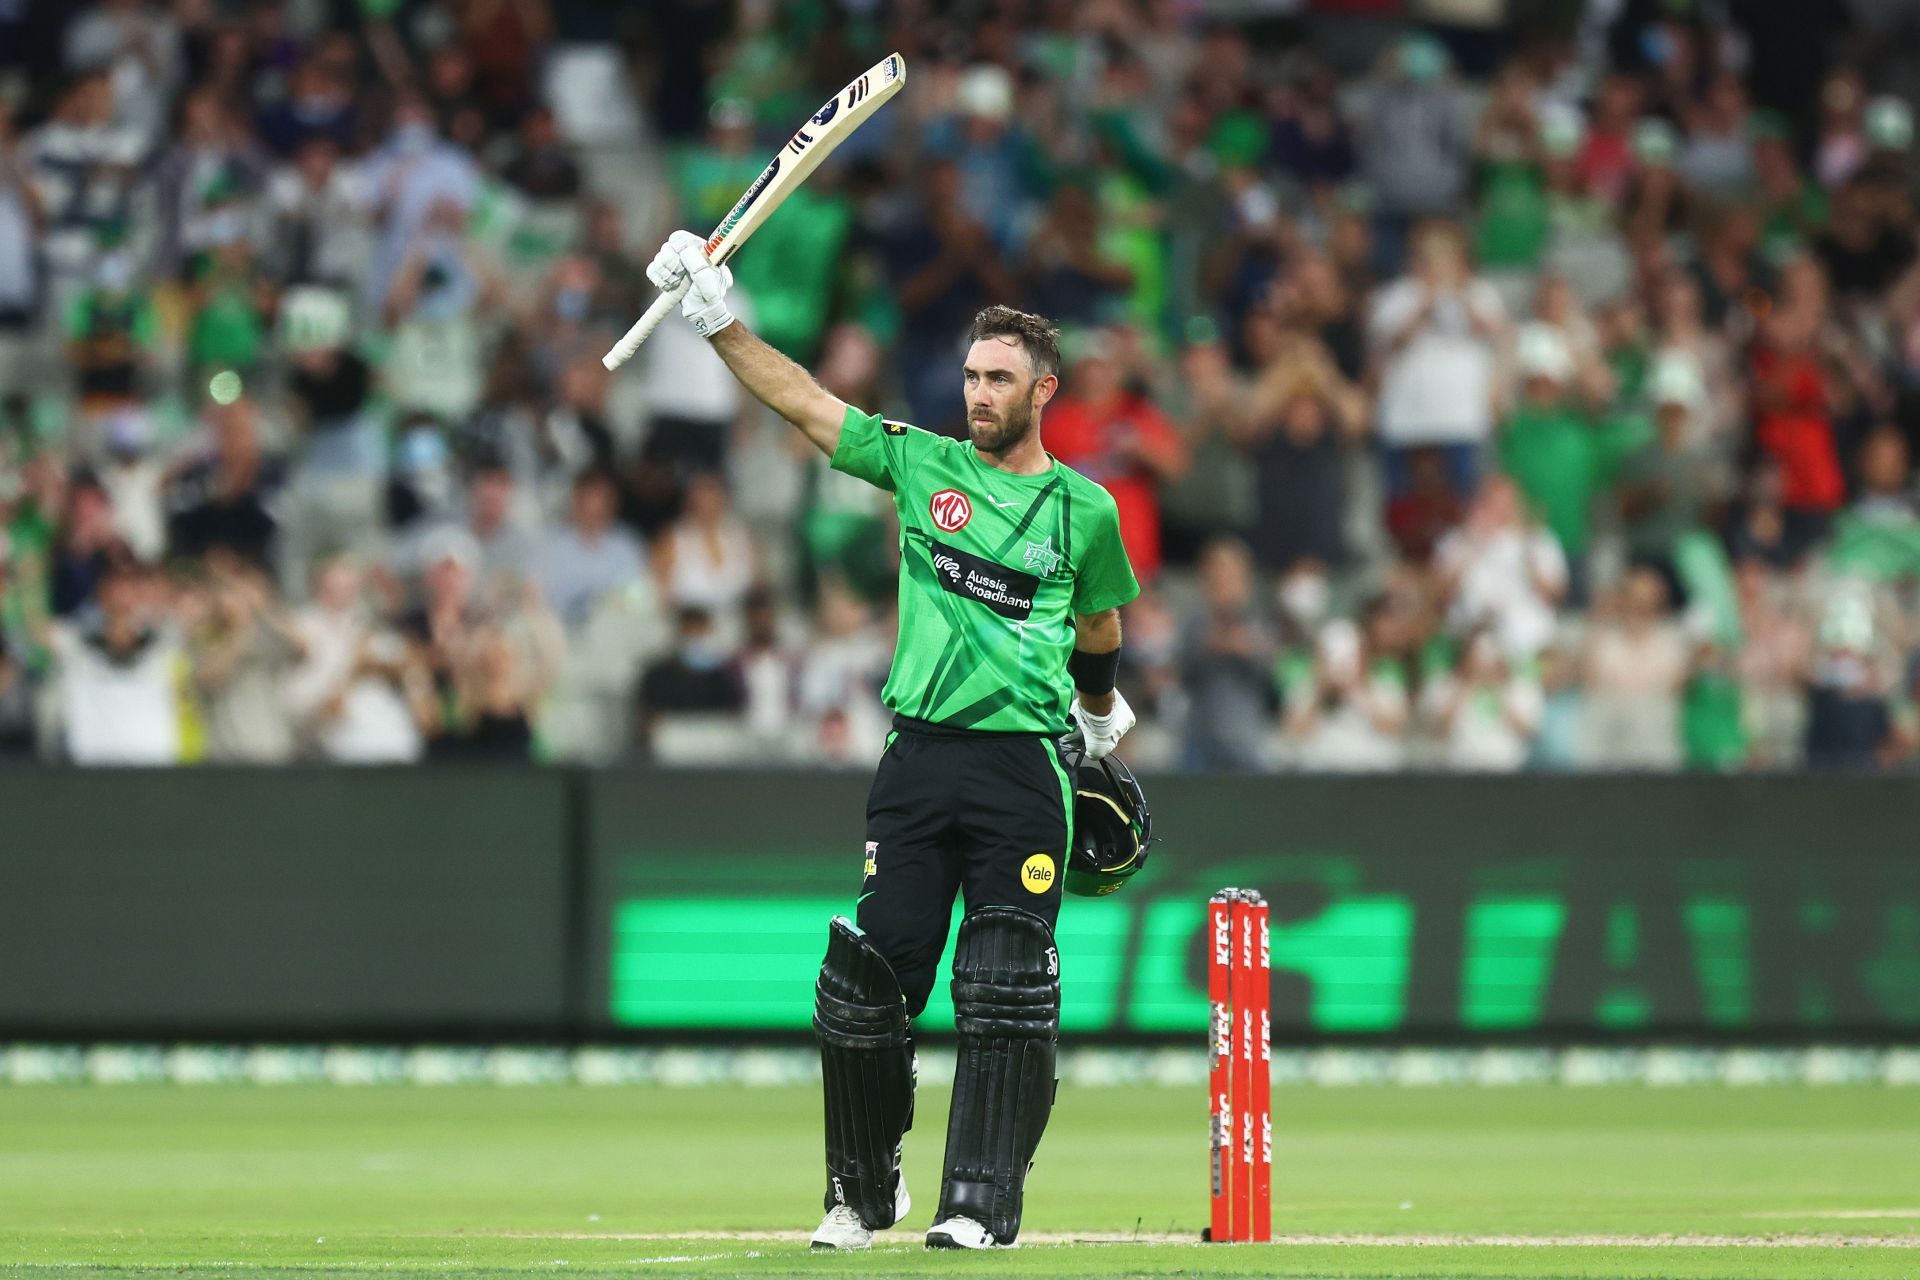 Glenn Maxwell took only 41 deliveries to complete his century